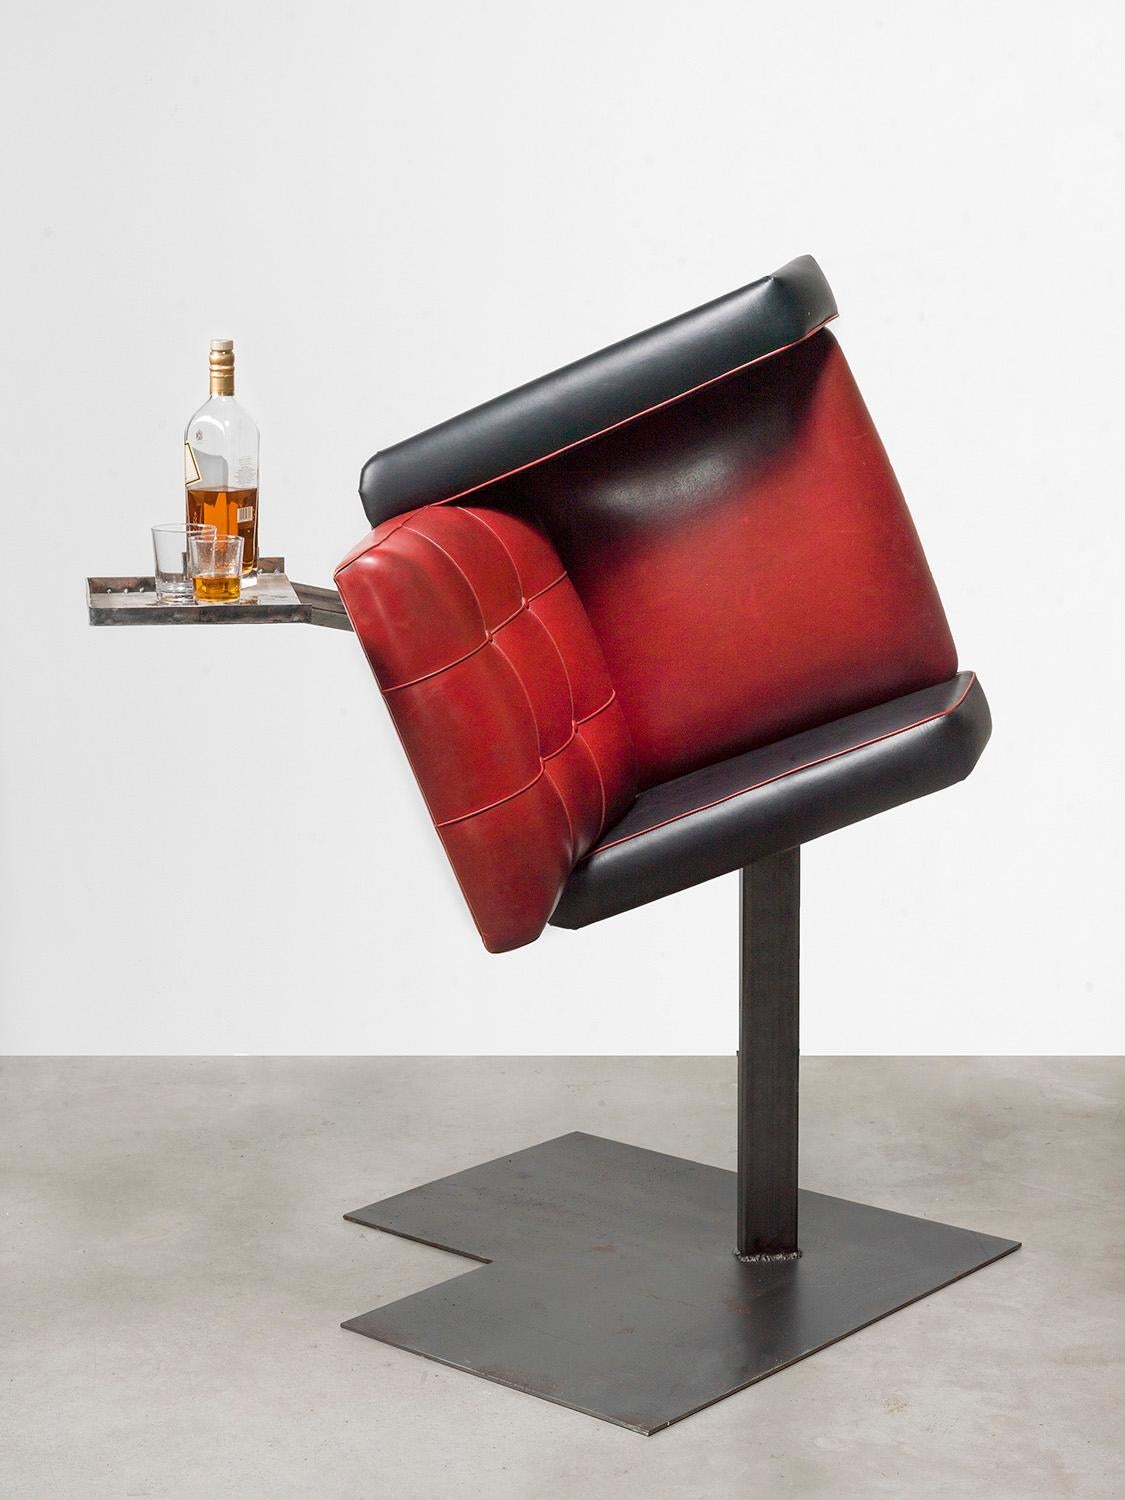 Erwin Wurm's Drinking Sculptures are an expansion of his One Minute Sculpture series. These performative works consist of vintage furniture mounted onto bronze sculptures - cucumbers and like forms - turned into bars on which various spirits and